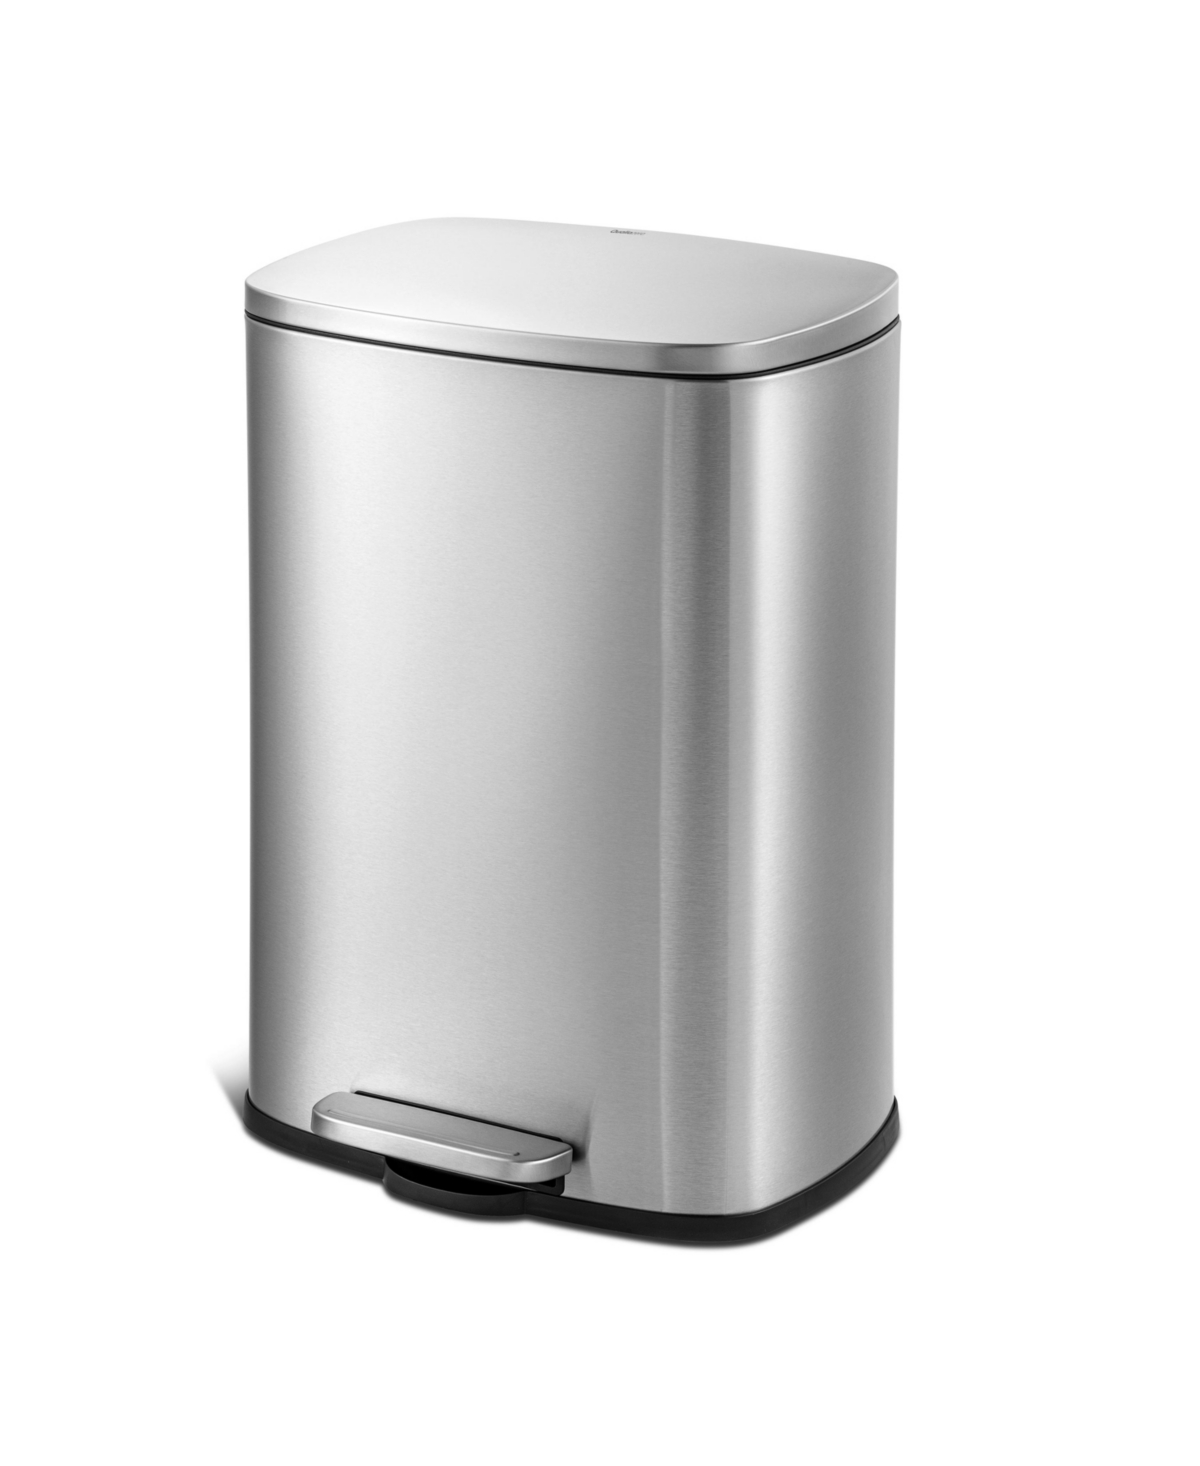 13.2 Gallon Rectangular Step Can - Stainless Steel